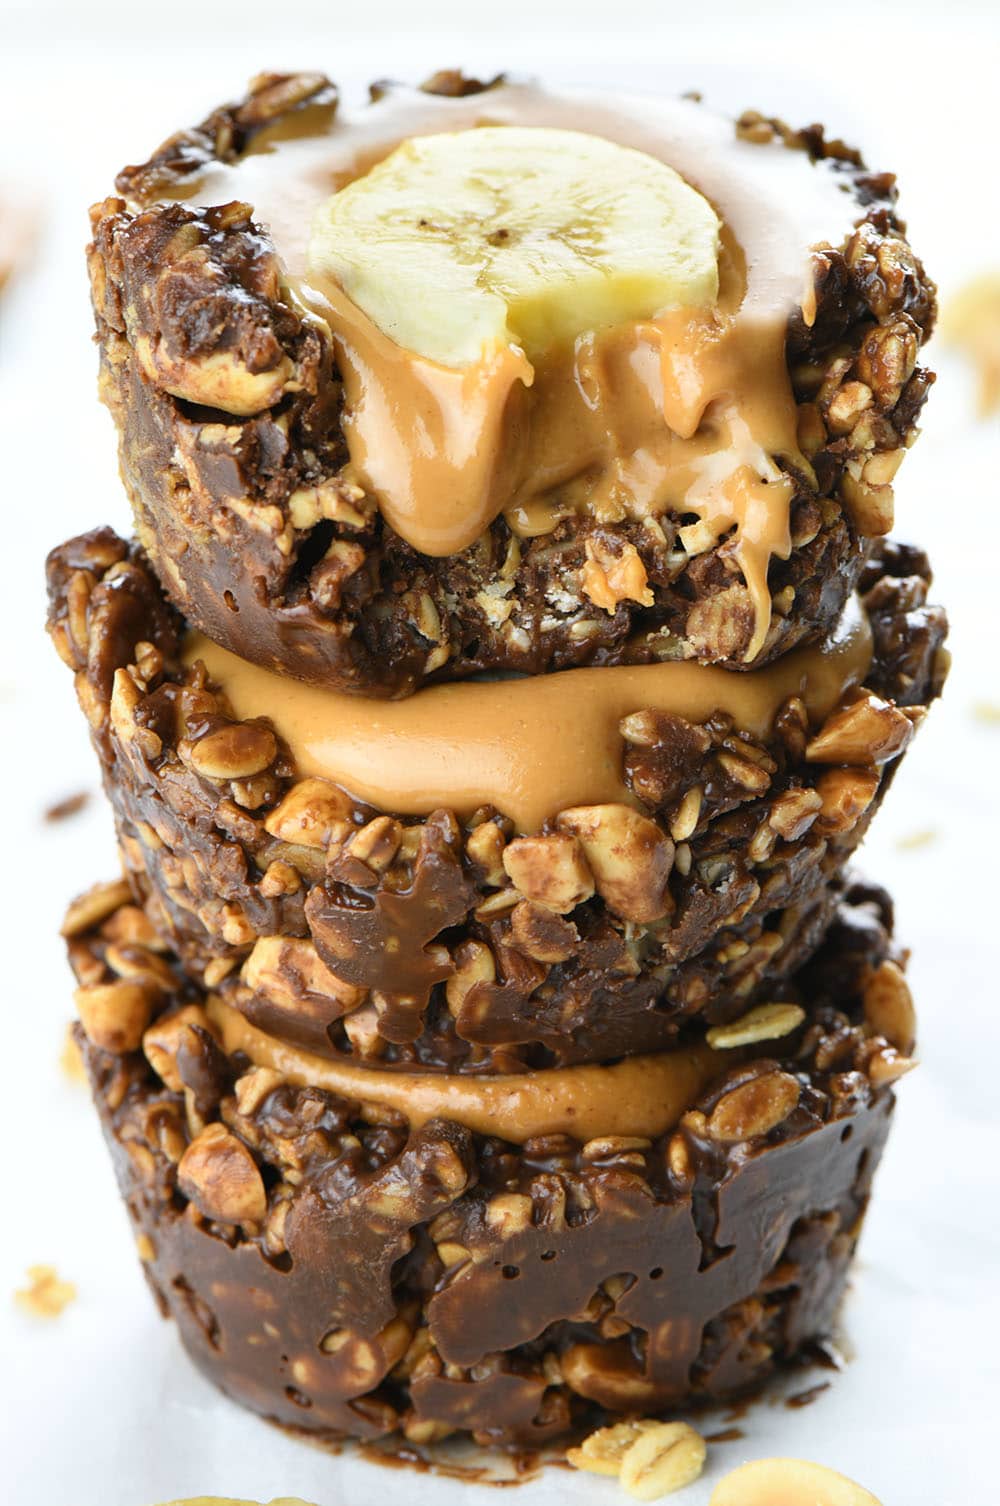 Chocolate Granola Cups with Peanut Butter Filling is an easy, no-bake recipe with only 6 ingredients.